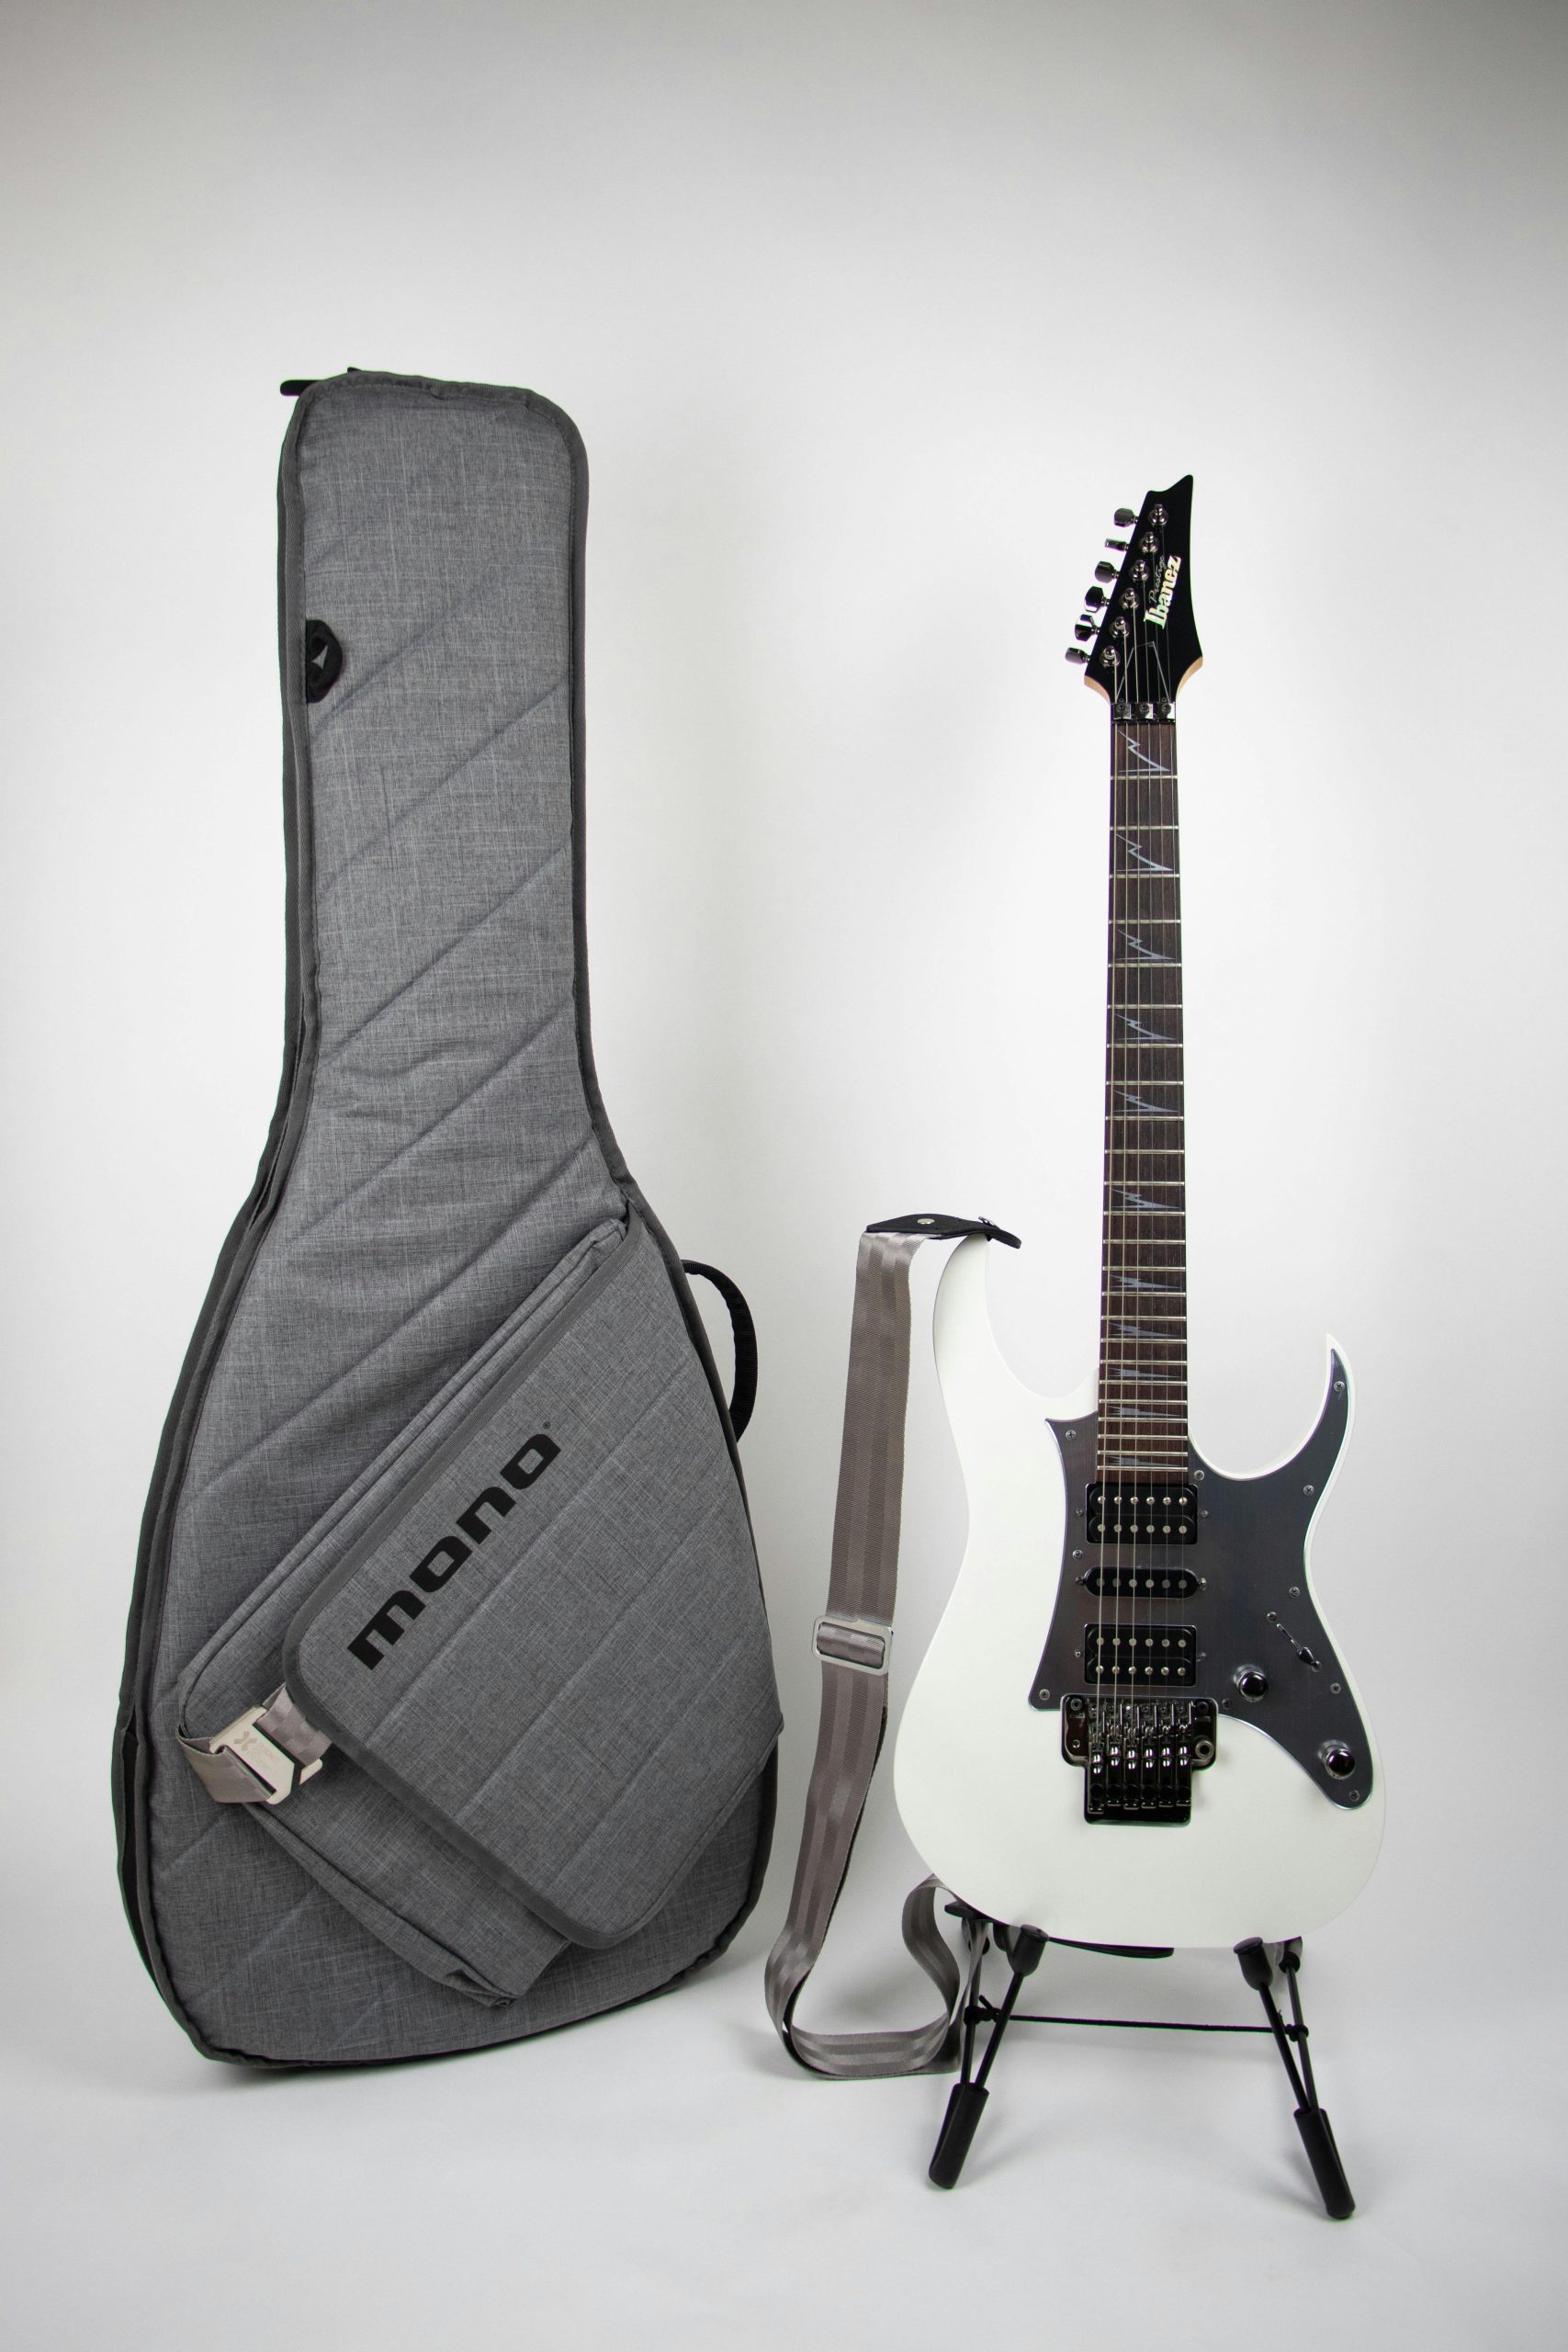 Guitar case with pocket